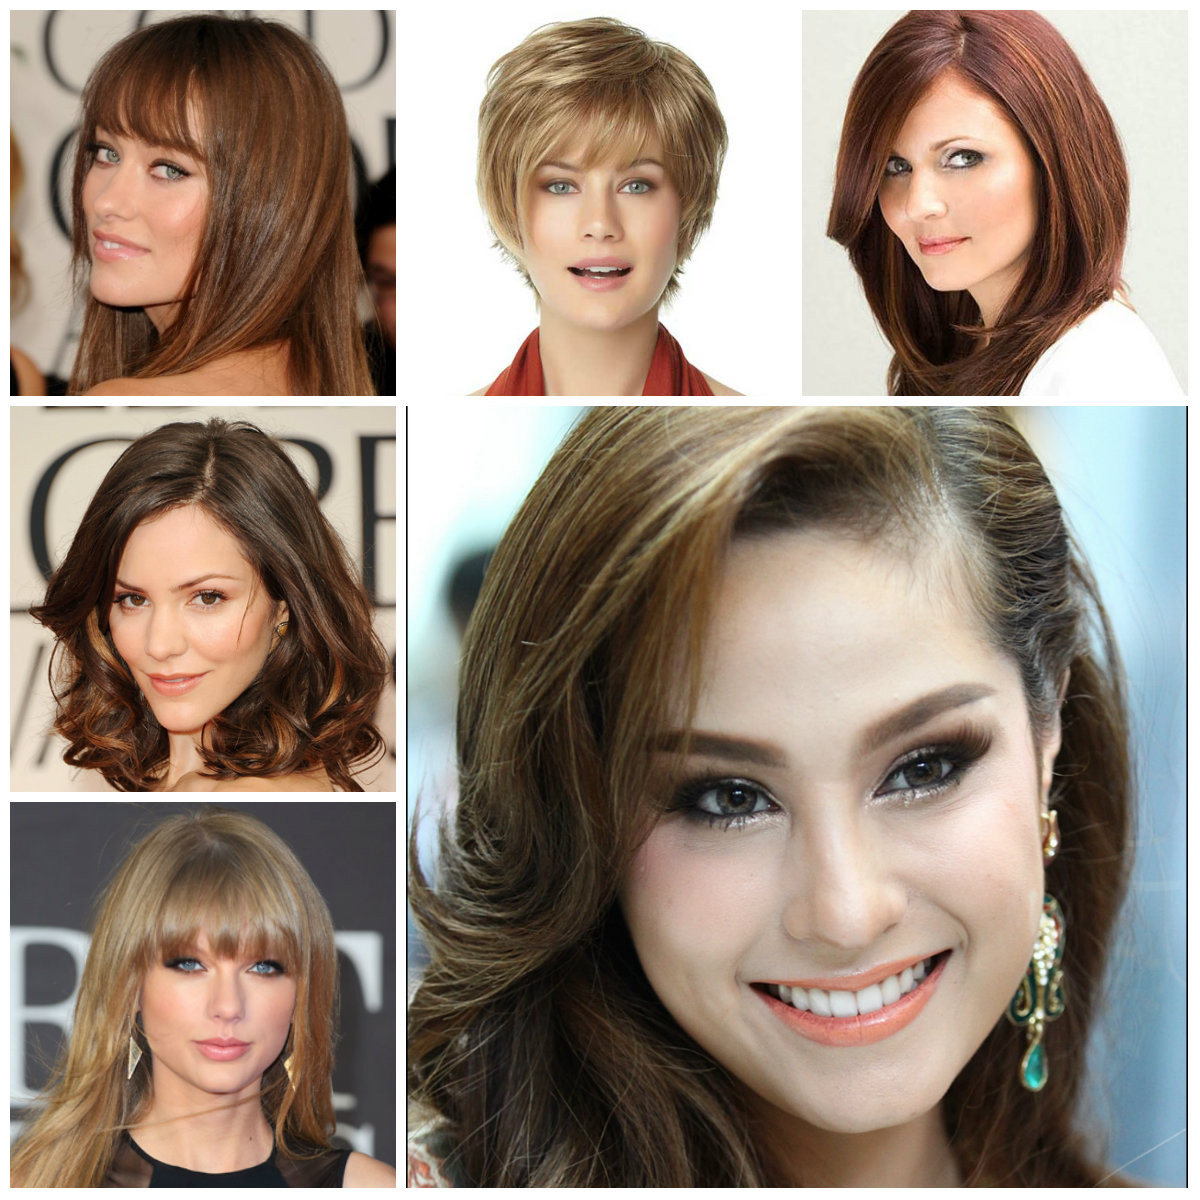 Hairstyles For Face Shape Female
 The Right Hairstyles for Your Face Shape 2016